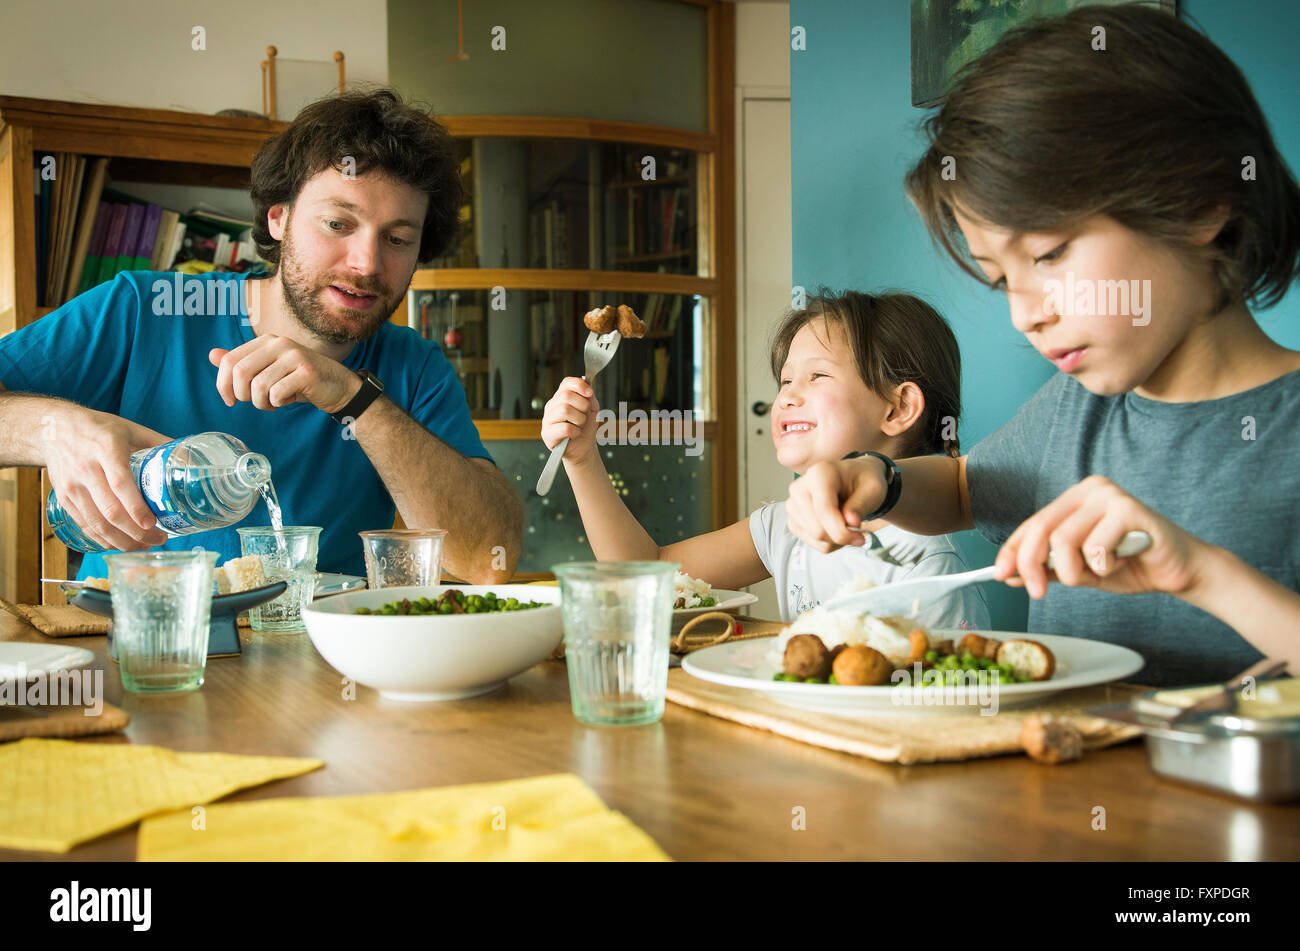 Family eating dinner together Stock Photo